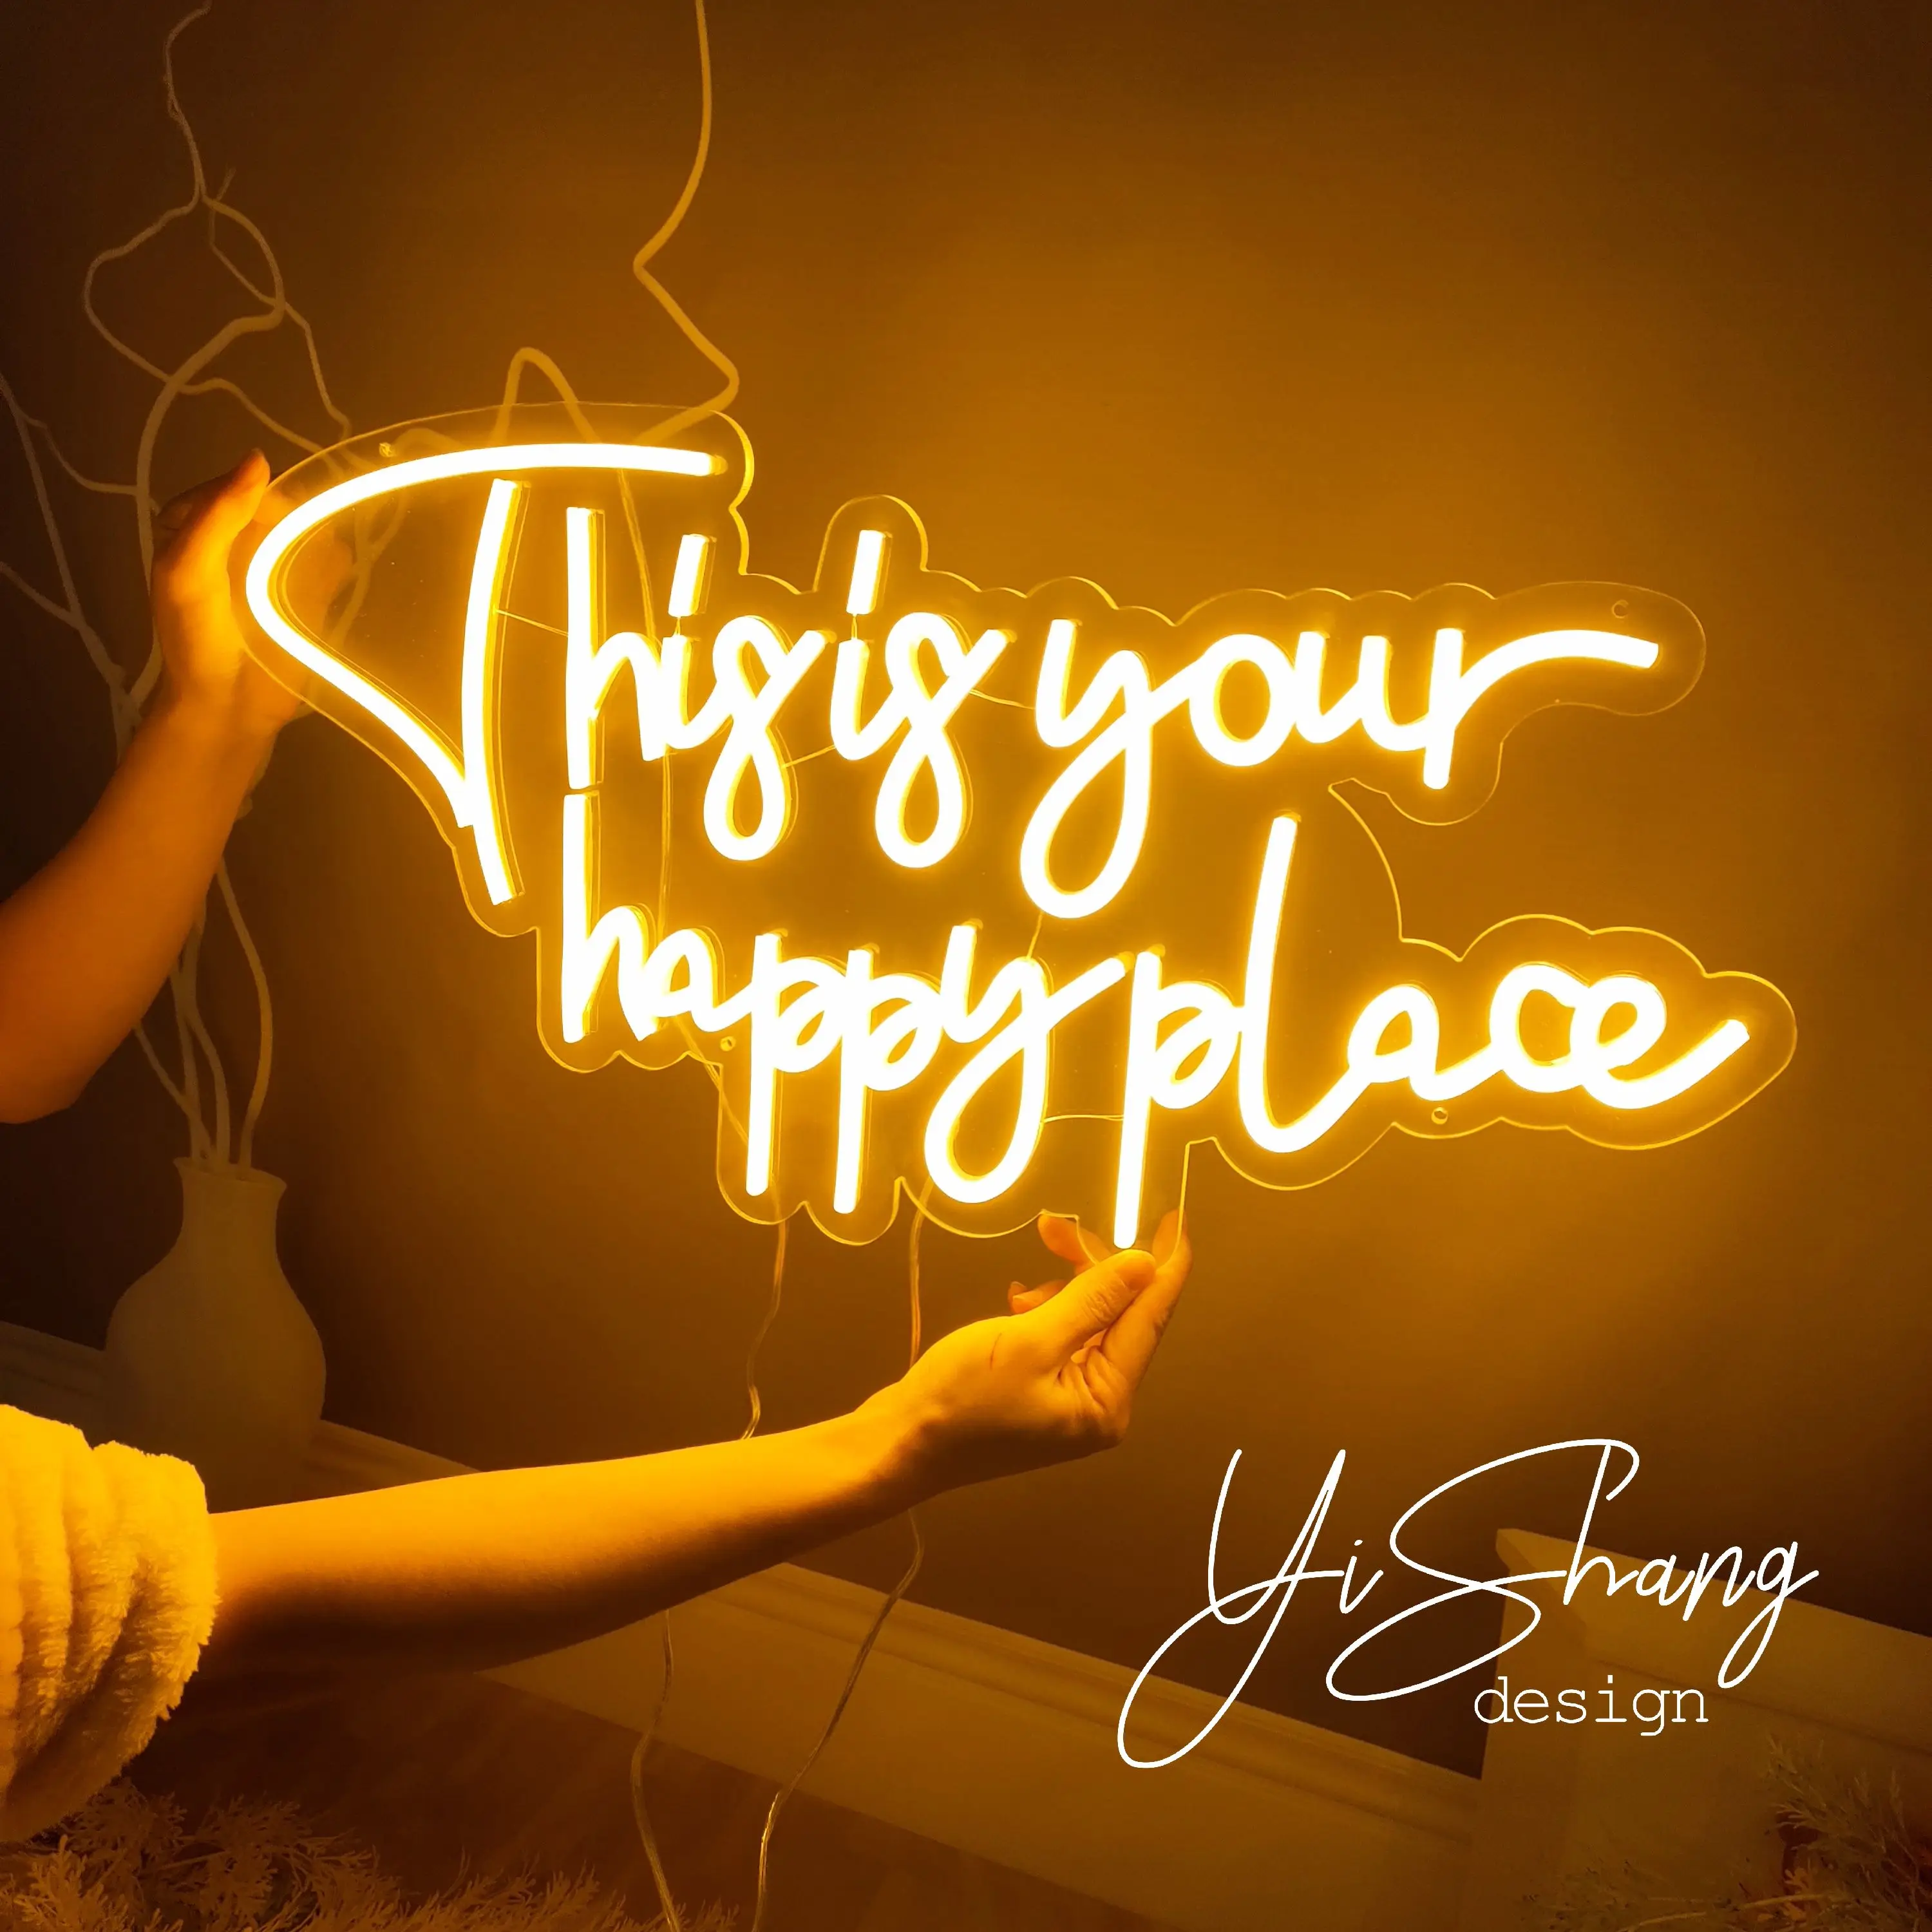 

This is Our Happy Place Neon Signs Custom Neon Light Sign Led Custom Light Neon Decor Home Room Wall Decoration Ins Shop Decor